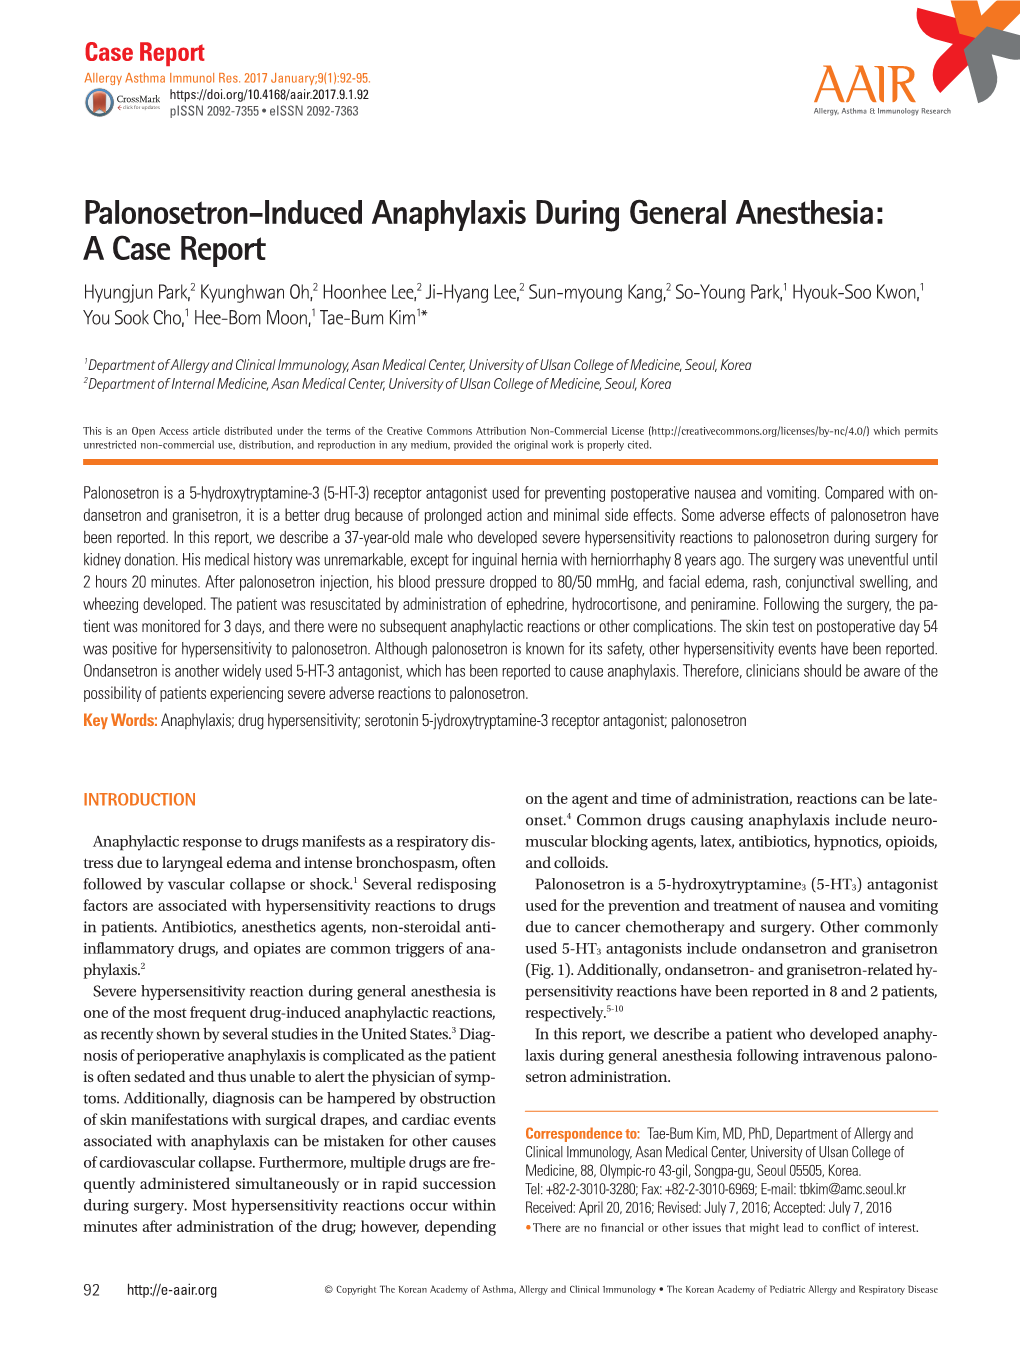 Palonosetron-Induced Anaphylaxis During General Anesthesia